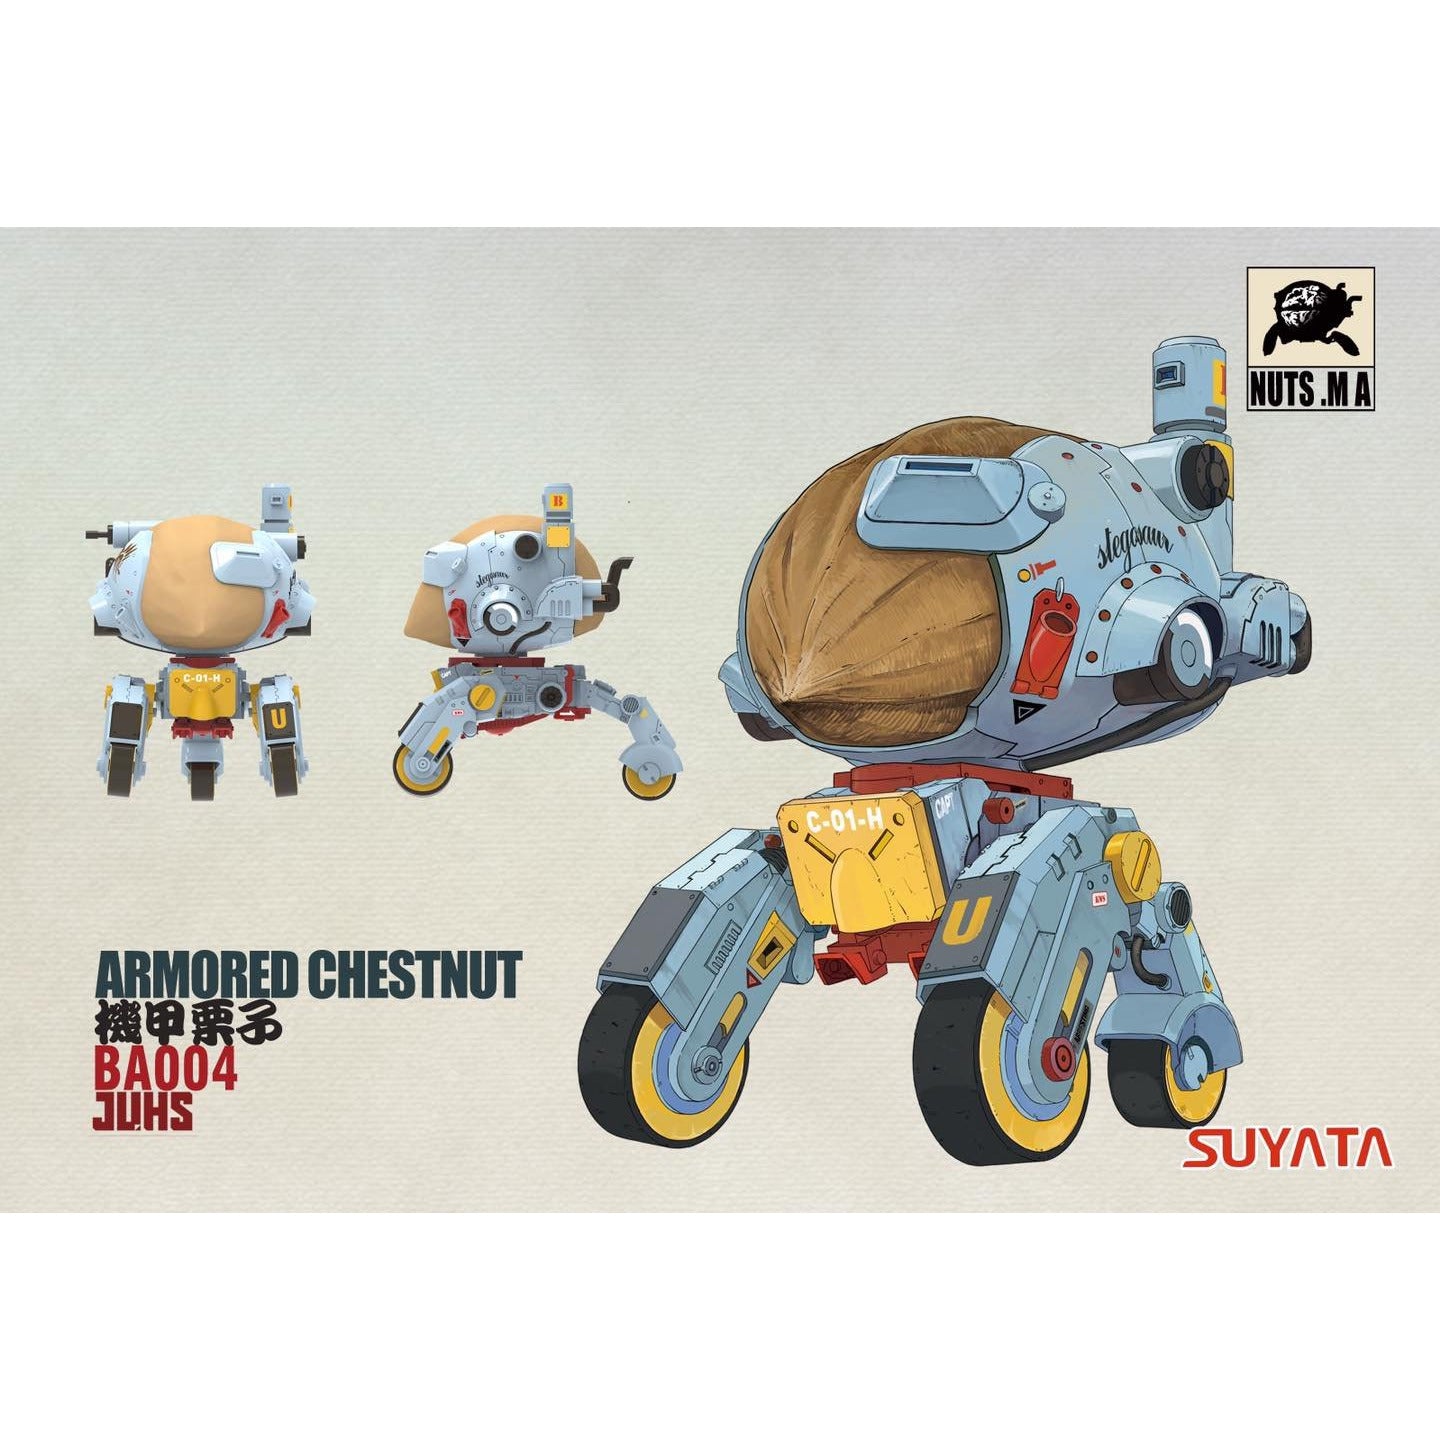 Armored Chestnut #004 by Suyata